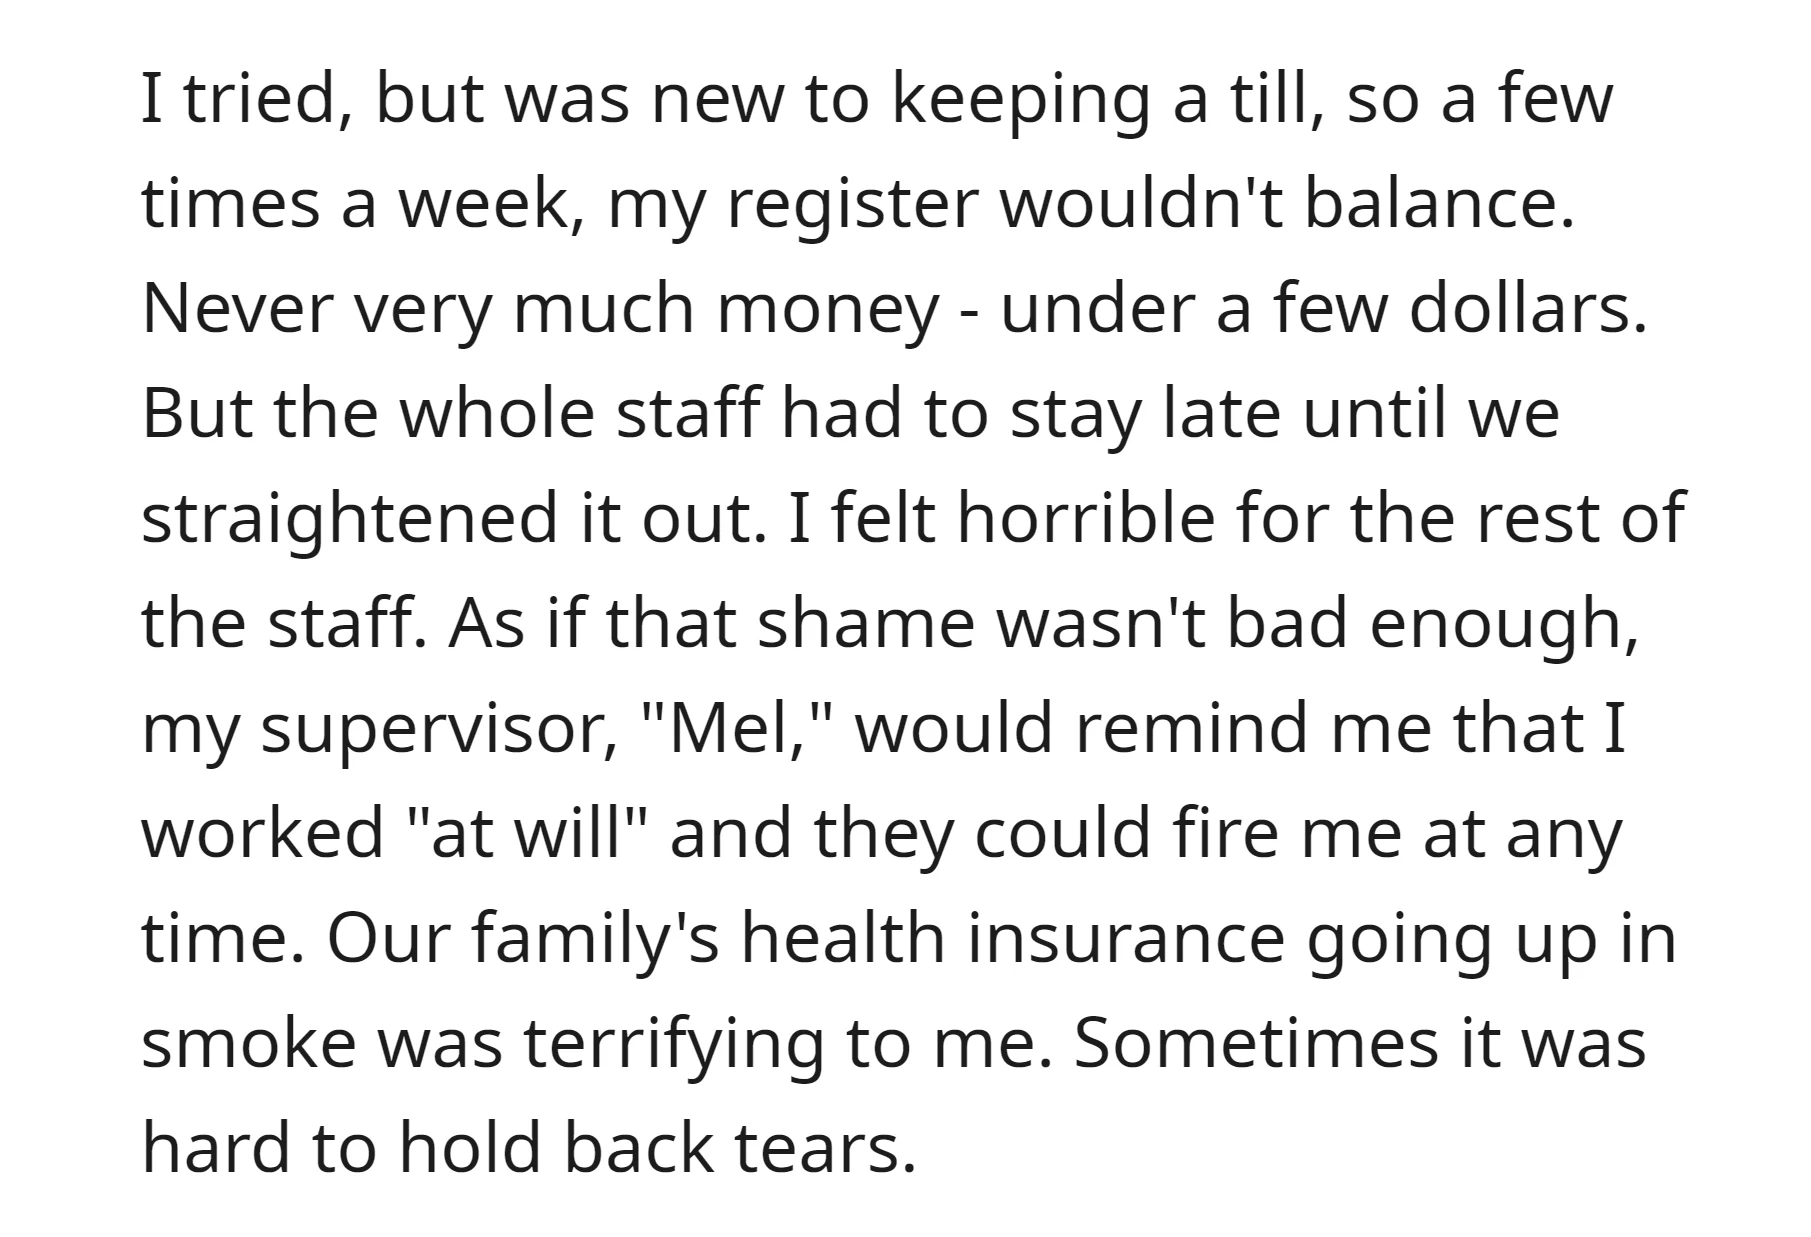 OP experienced frequent issues that caused stress for the entire staff